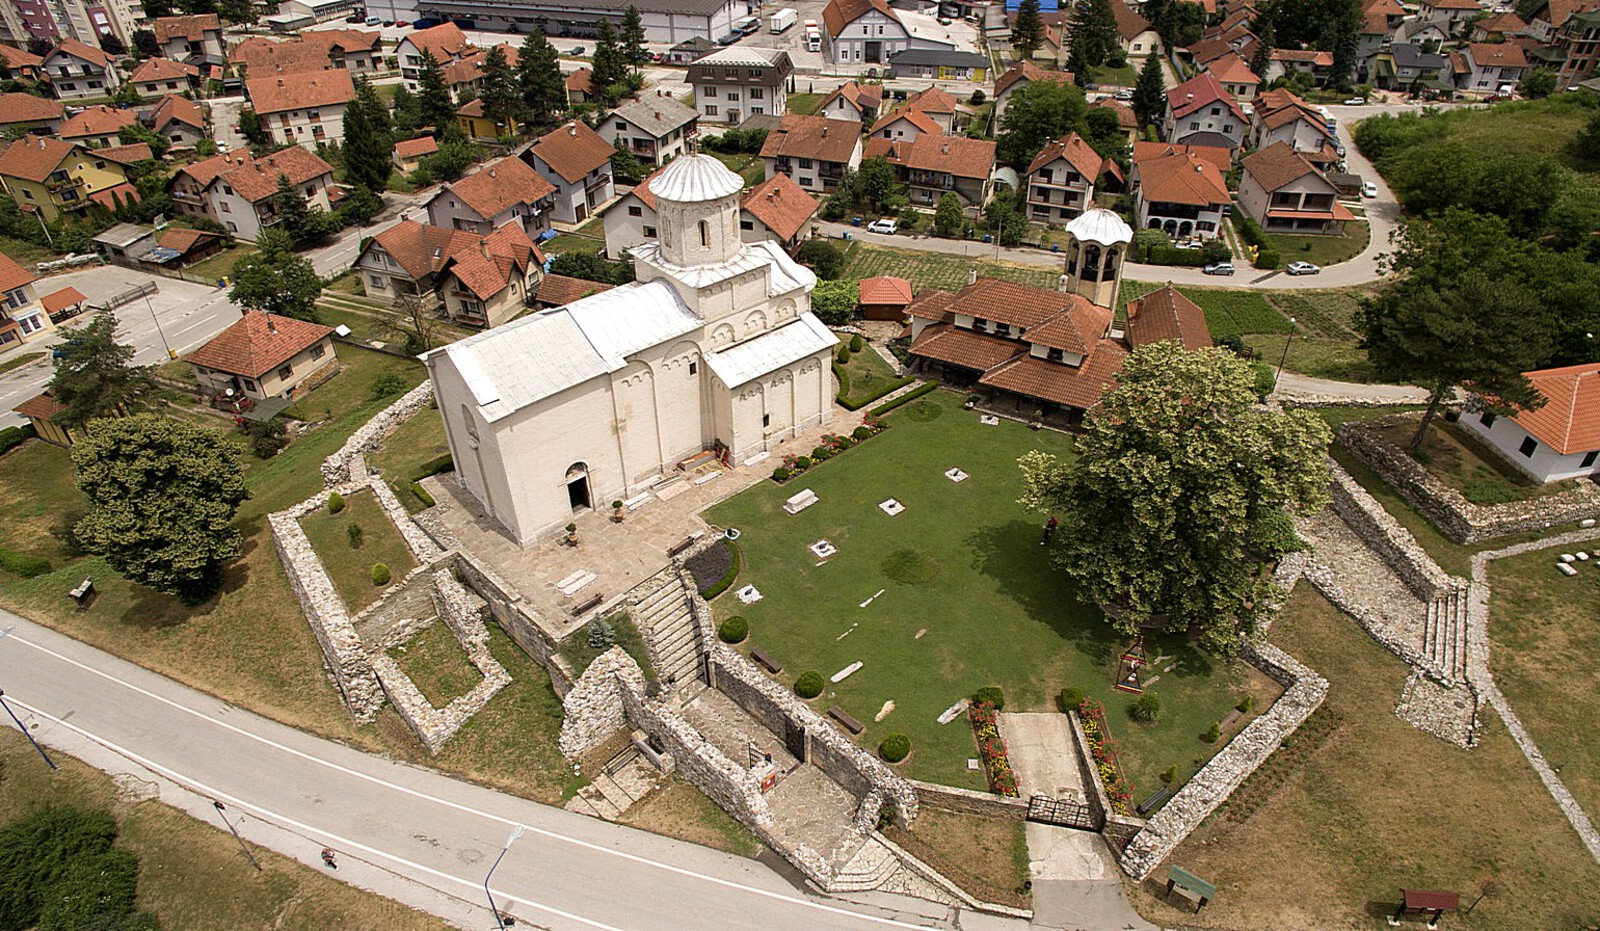 Arilje church and remains of the monastery buildings